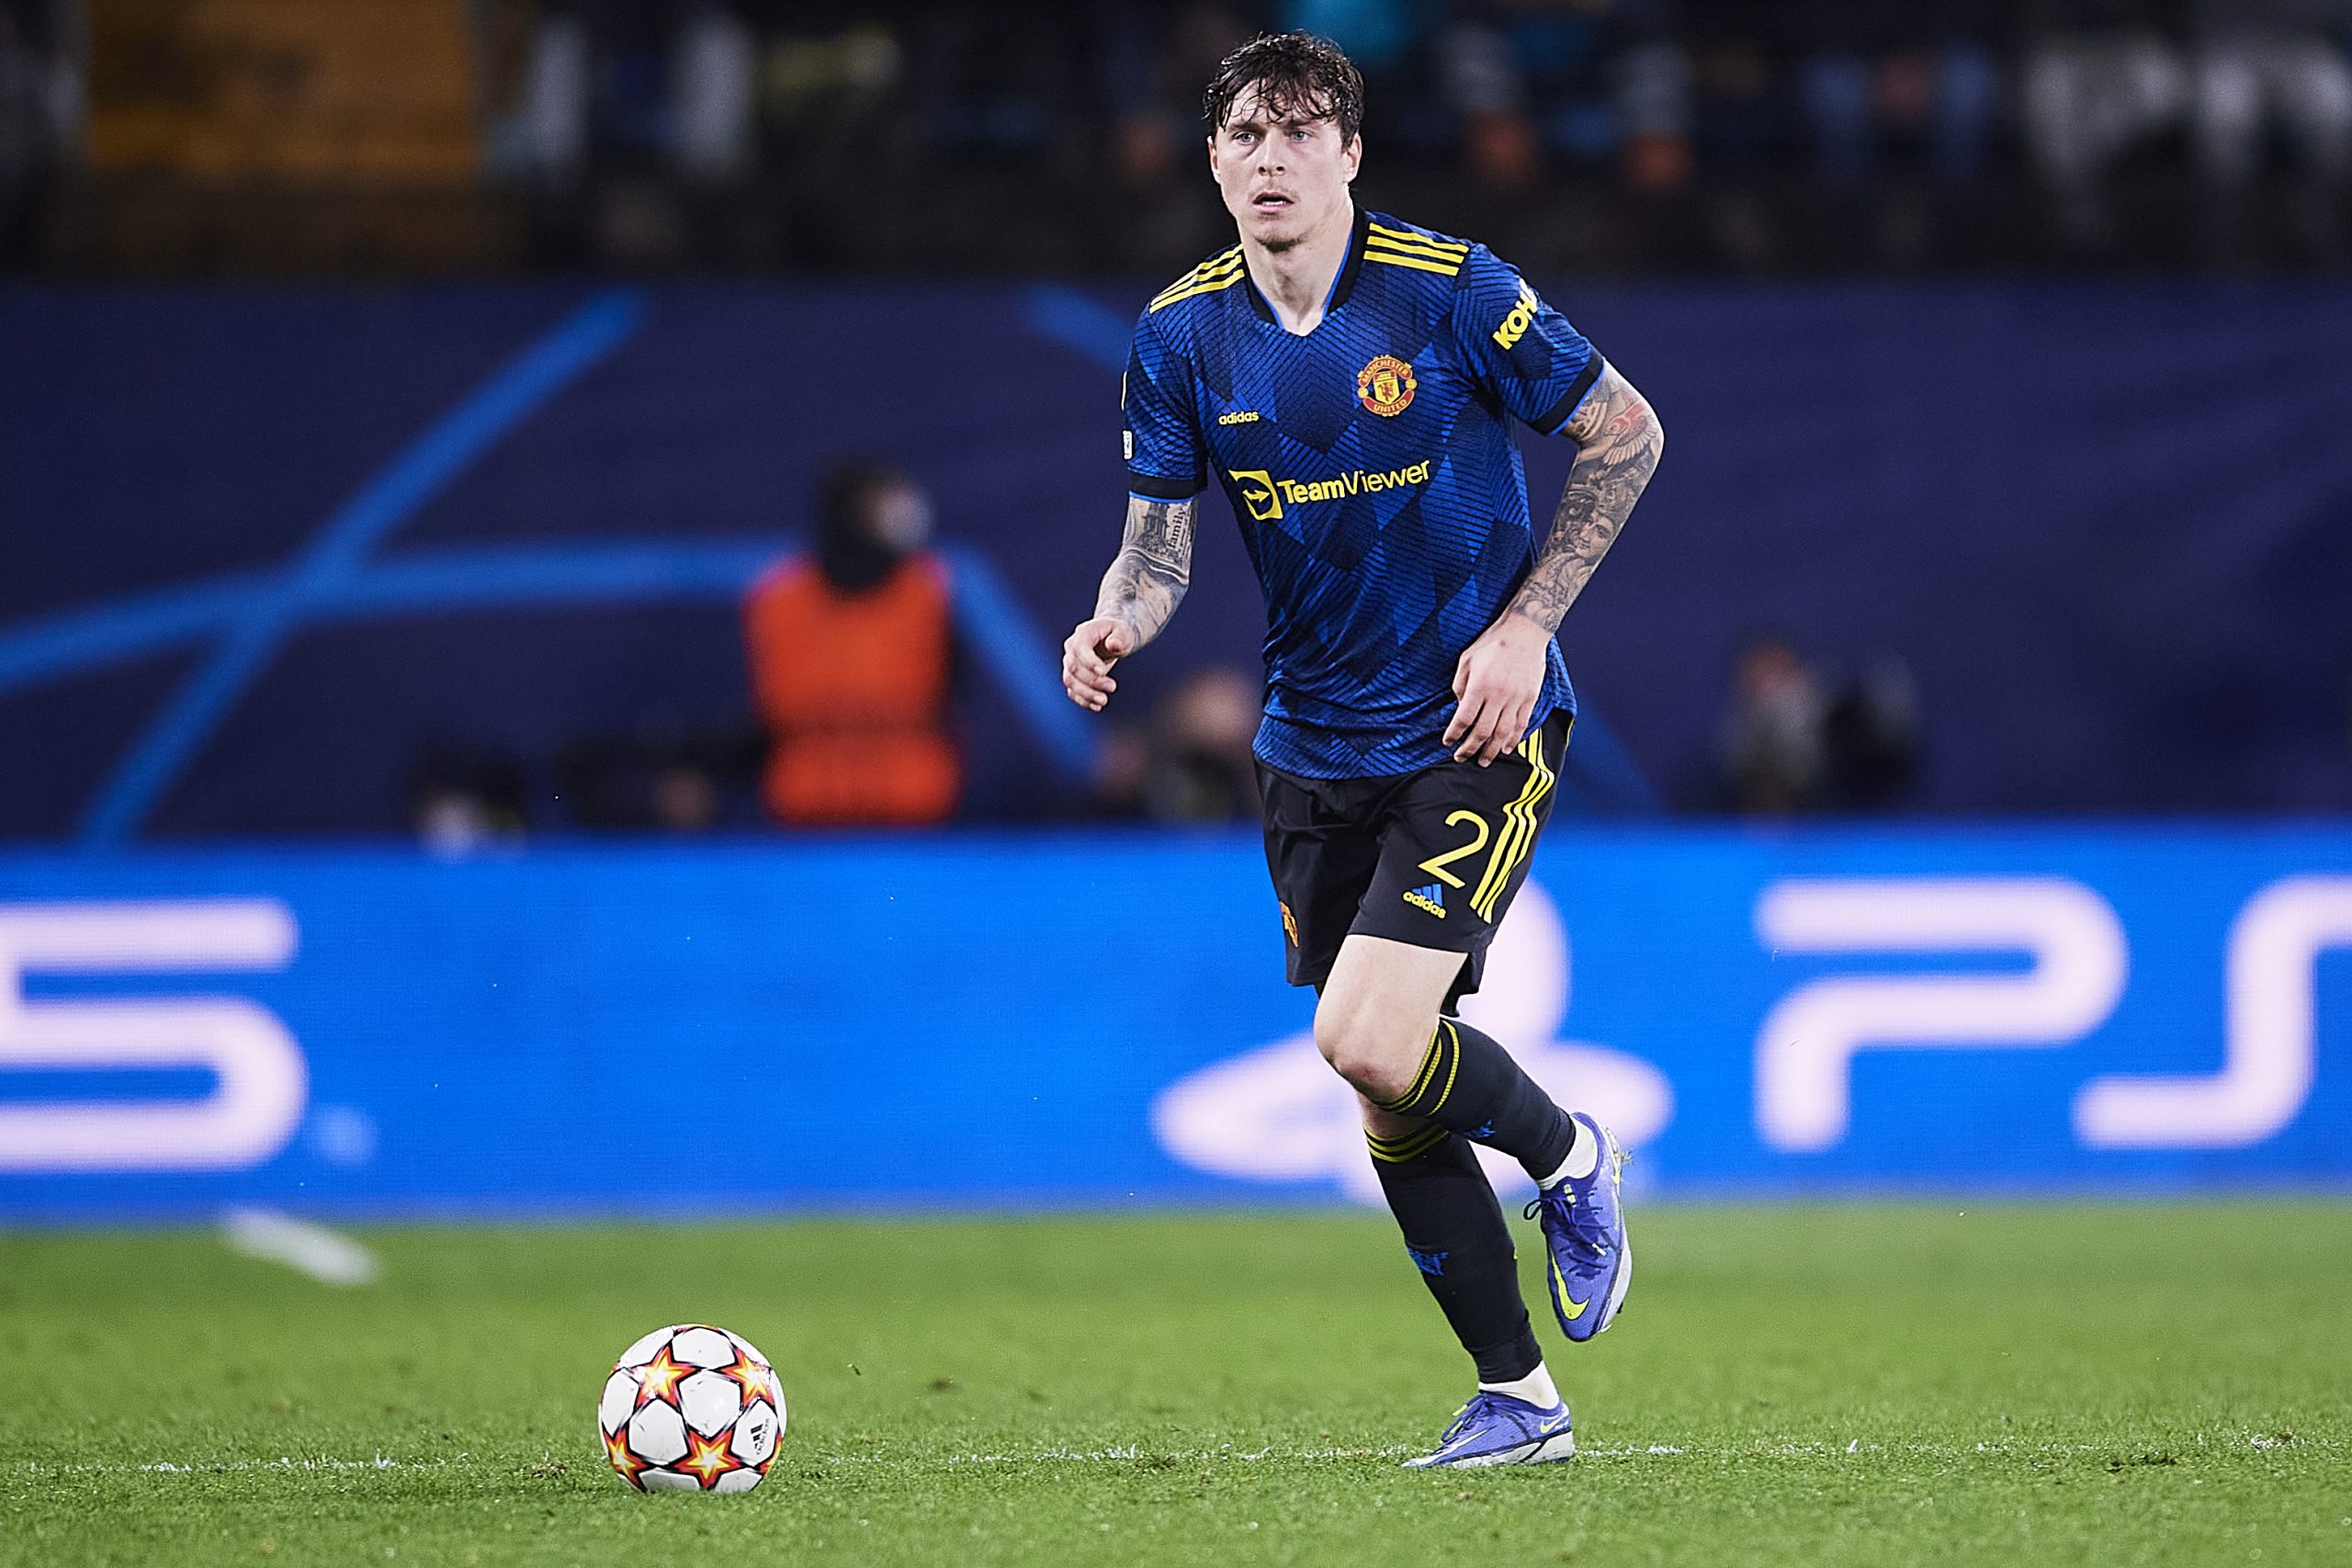 Galatasaray thinking about making a move for Manchester United centre-back Victor Lindelof.